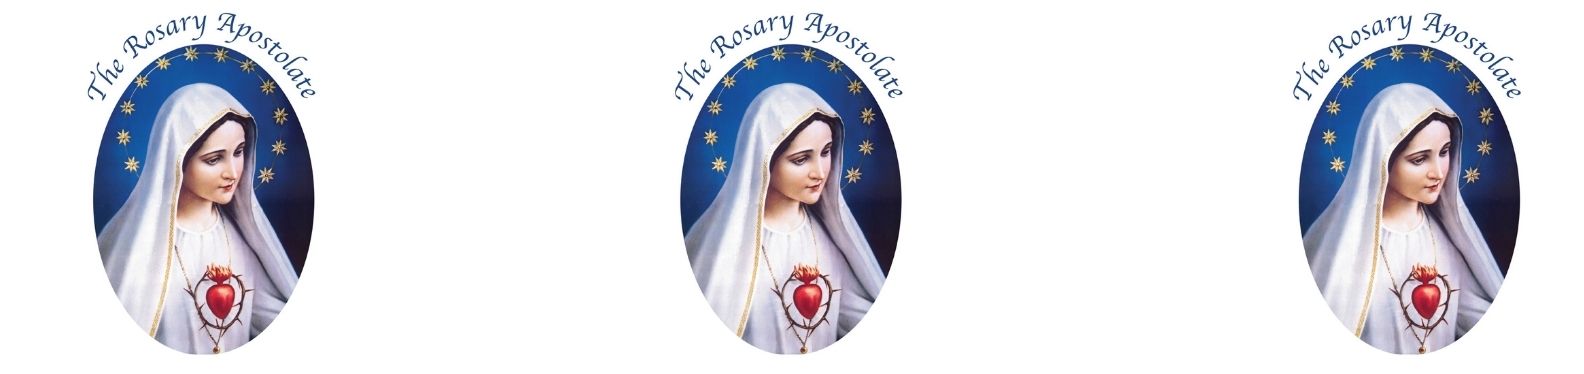 The Rosary Apostolate Logo of the Virgin Mary on a white background with the logo three times across the banner